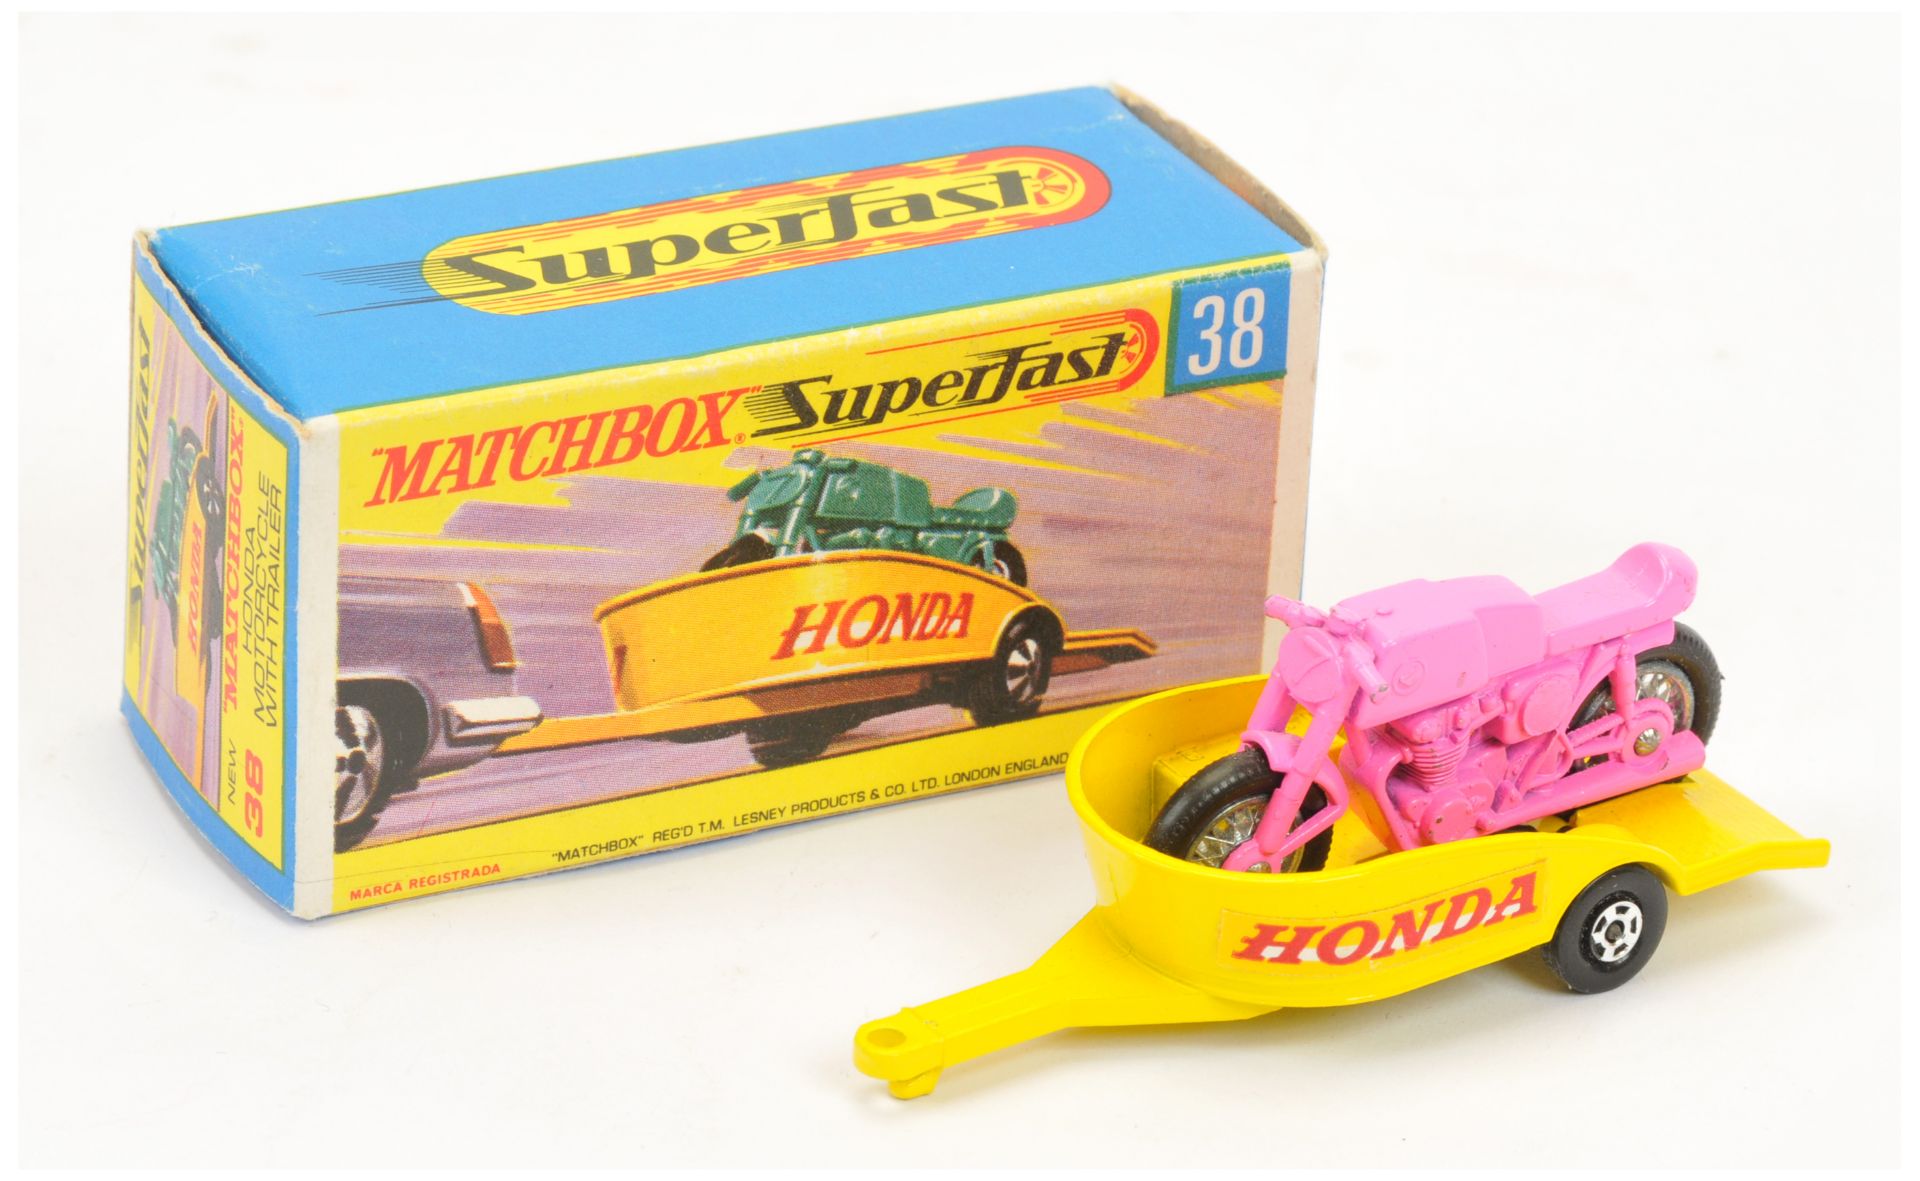 Matchbox Superfast 38a Honda Motorcycle & Trailer - pink motorcycle, lemon yellow trailer with Ho...